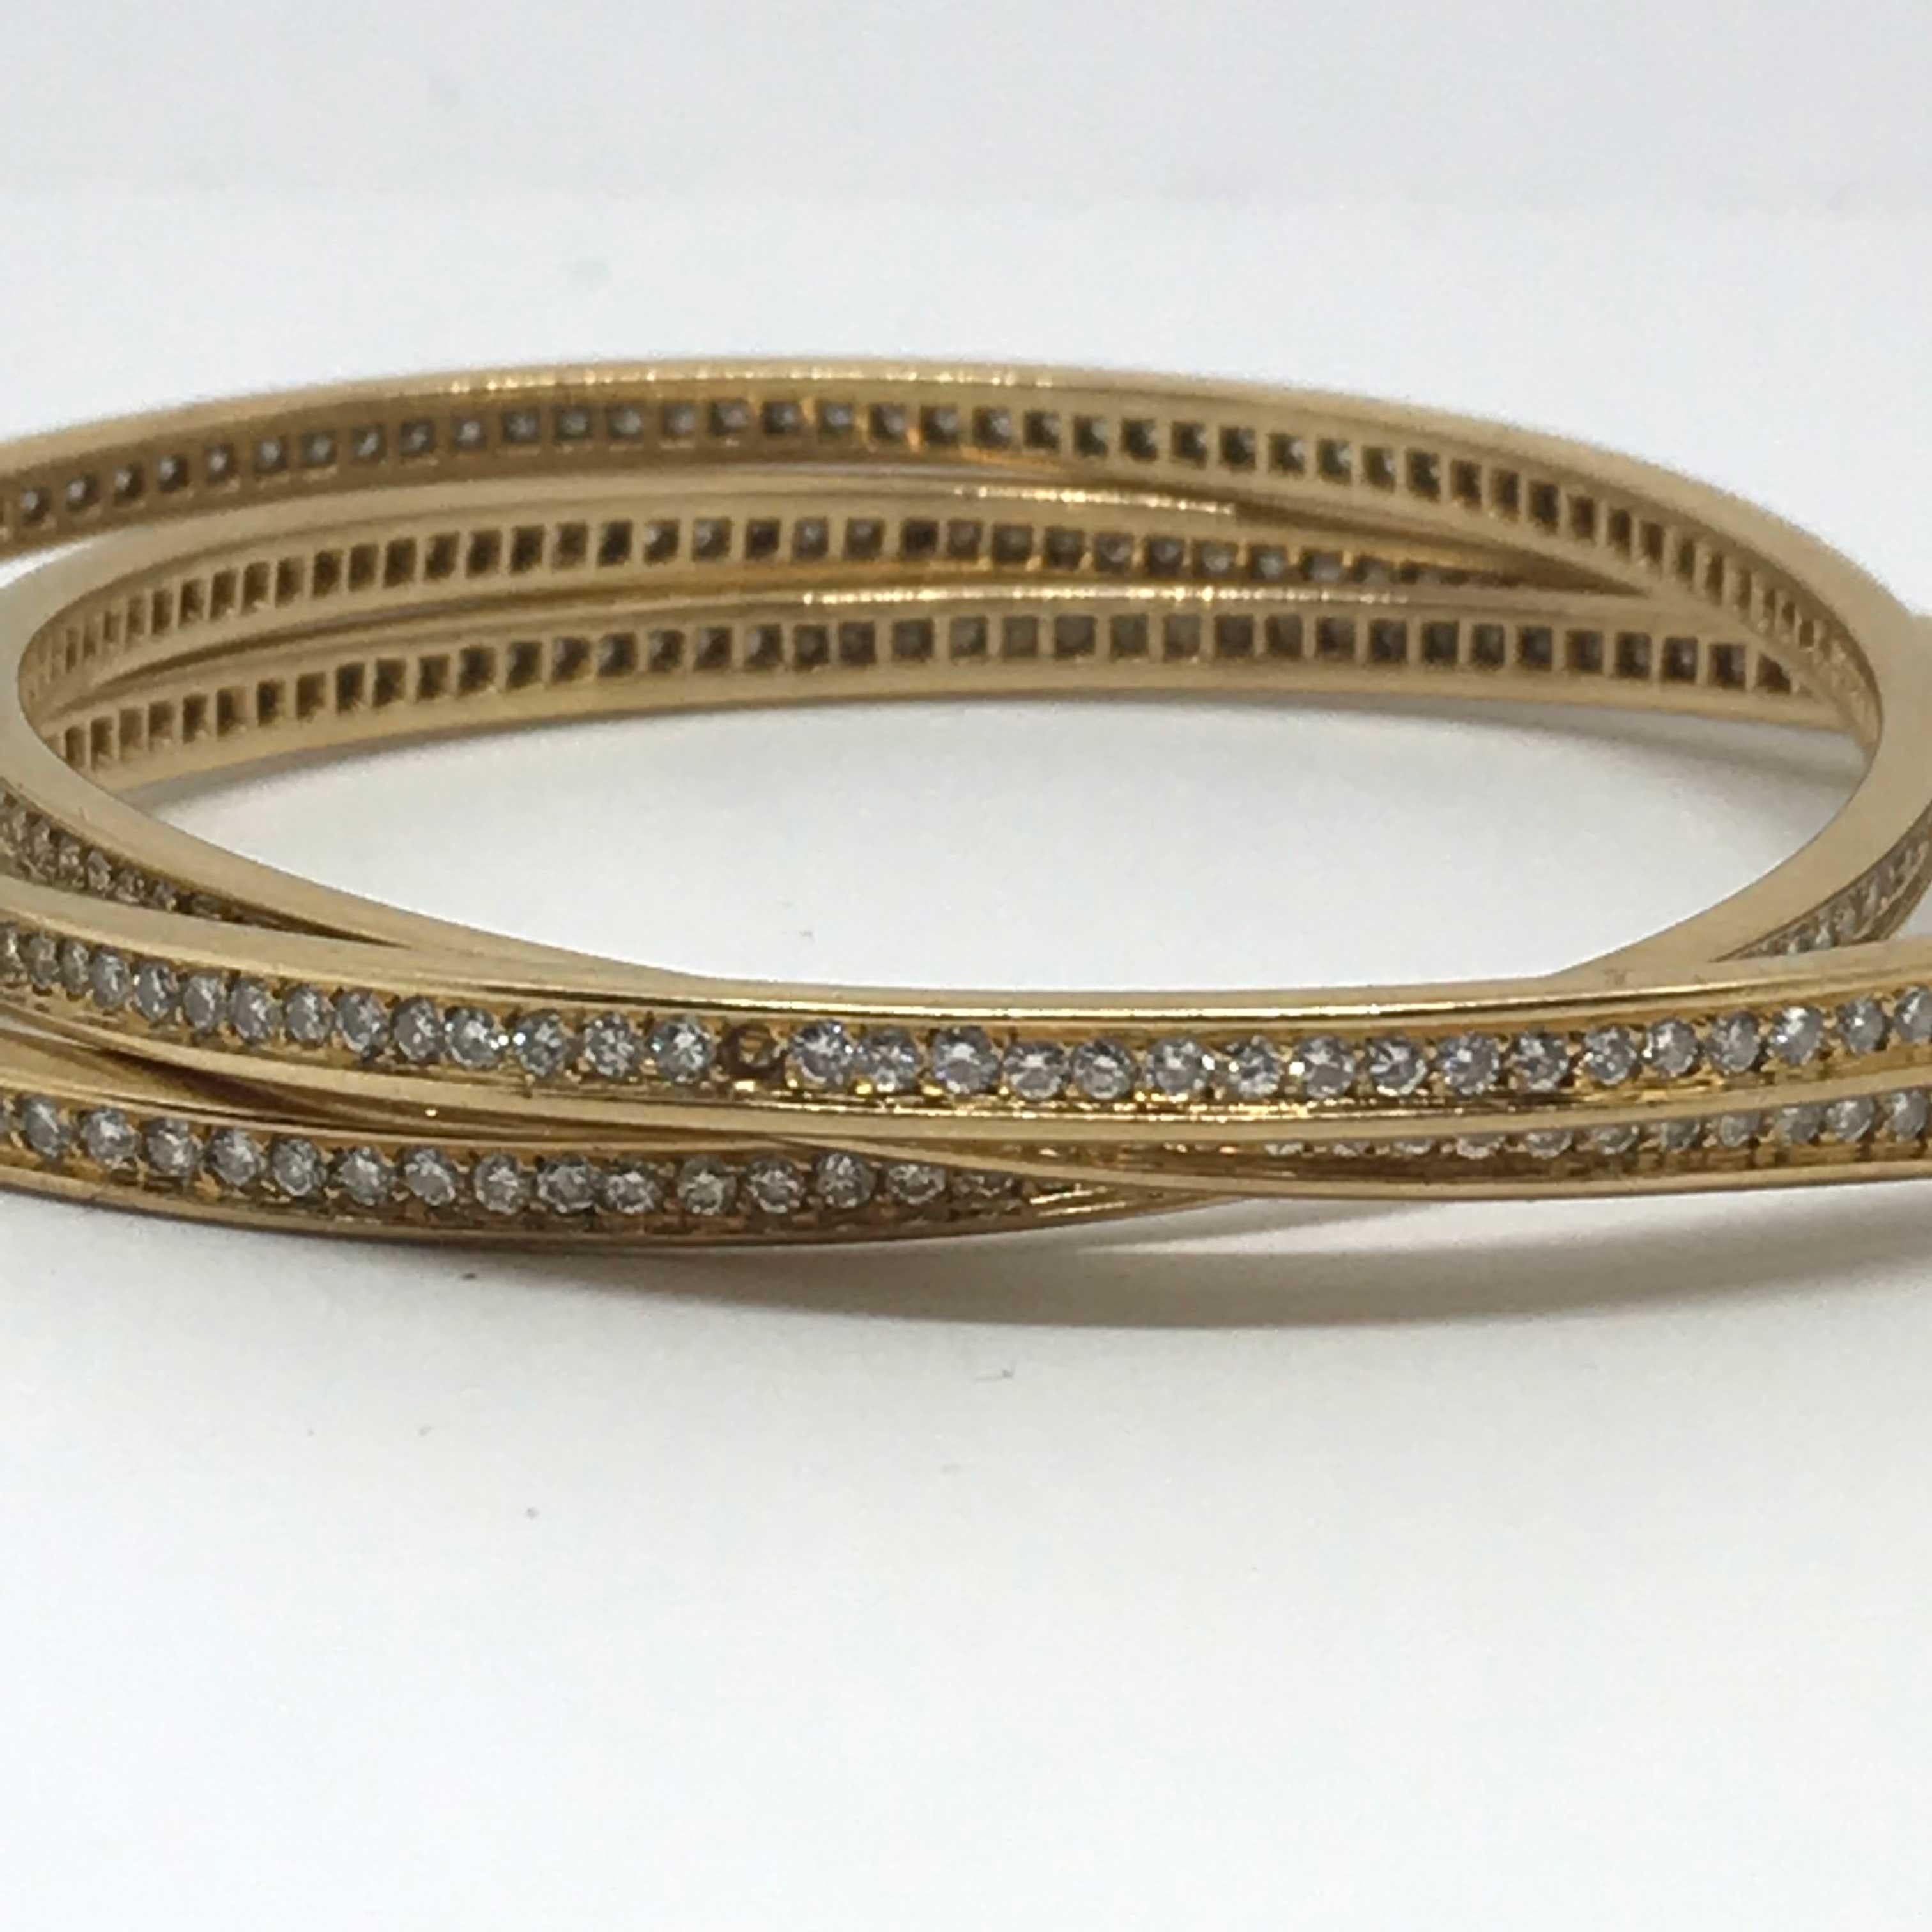 Amazing Vintage 3 Cartier bracelets in gold 18K. Cartier signature on it.
One diamond is missing (see pictures) Original vintage one.

Please find the measurements : 
Circumference (outside) : 23 cm
Circumference (inside) : 20,1 cm
Diameter : 6,7